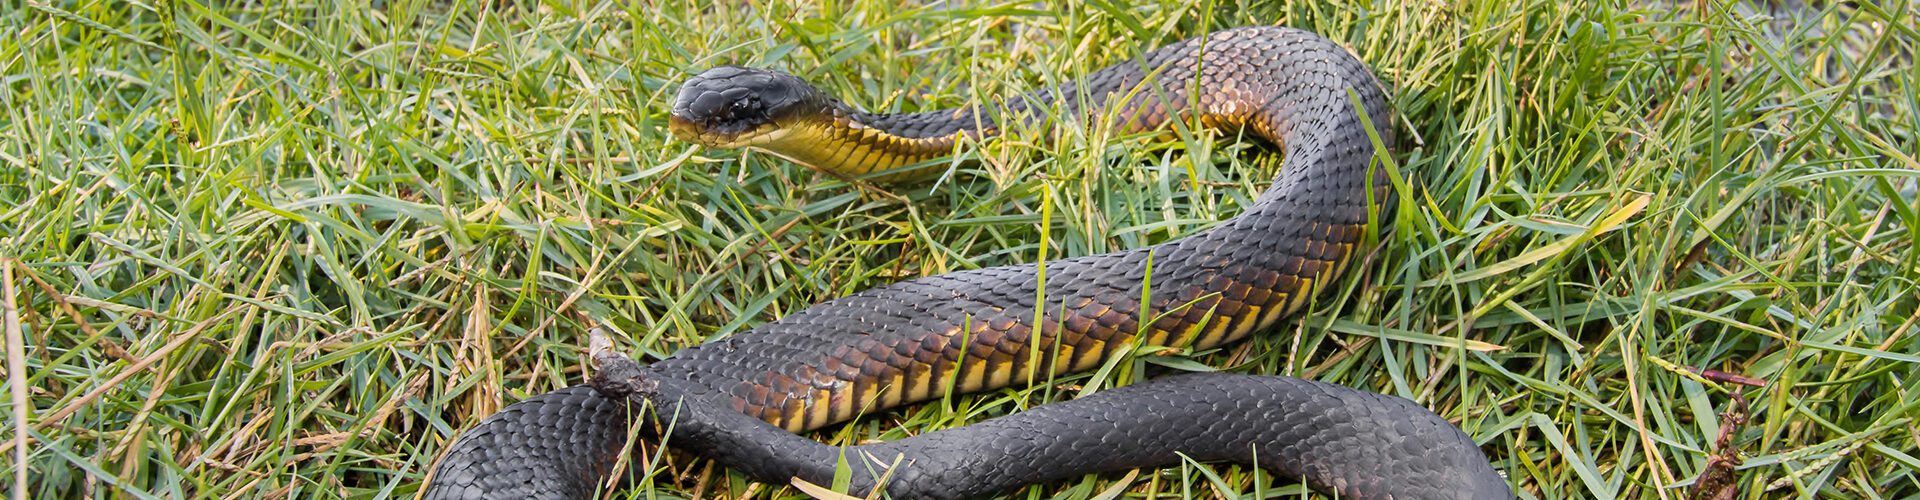 Harmful substances impacting tiger snakes across Perth, study finds